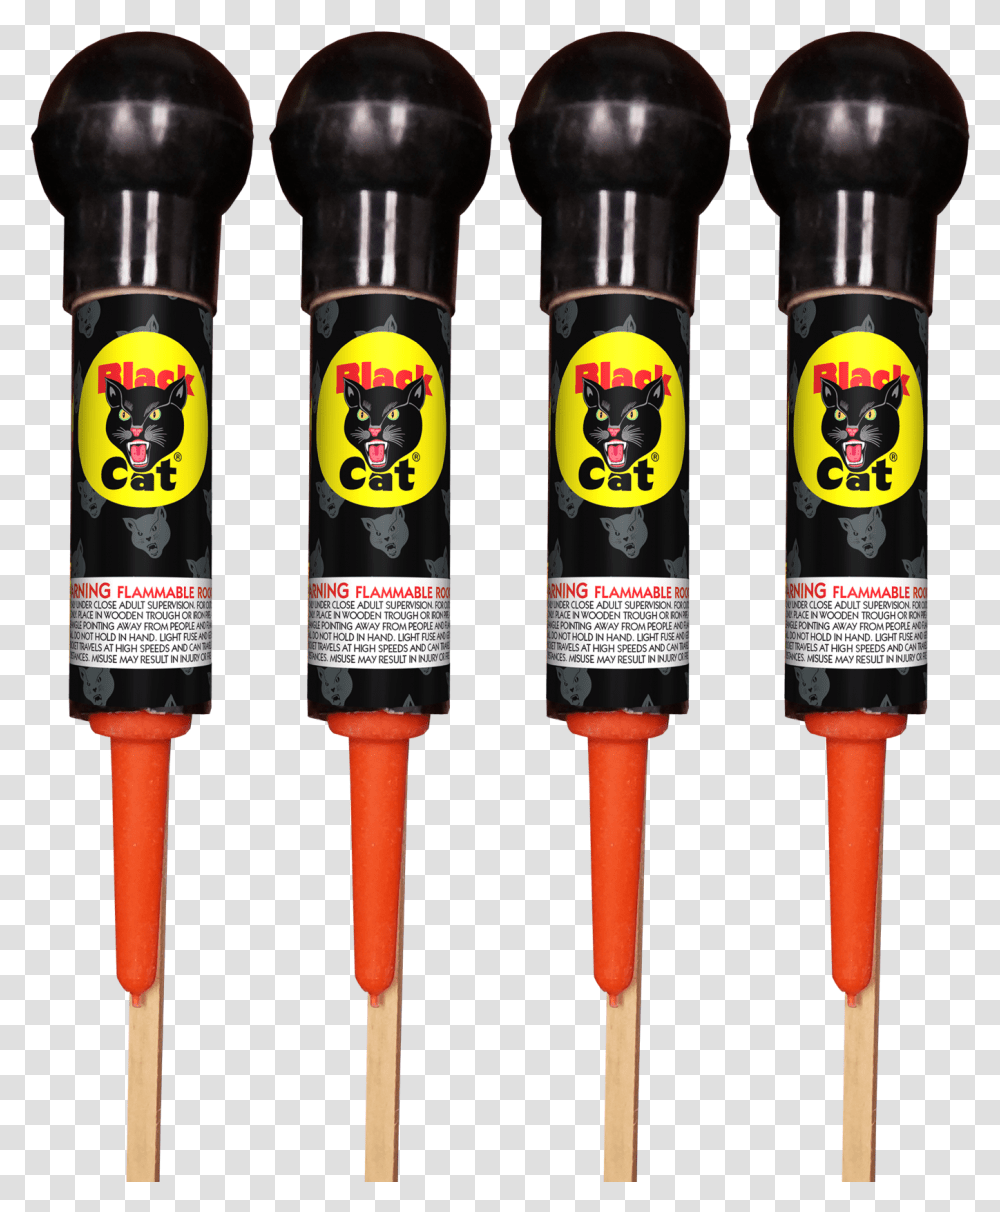 Red White And Blue Fireworks Black Cat Fireworks, Label, Adapter, Lamp Transparent Png